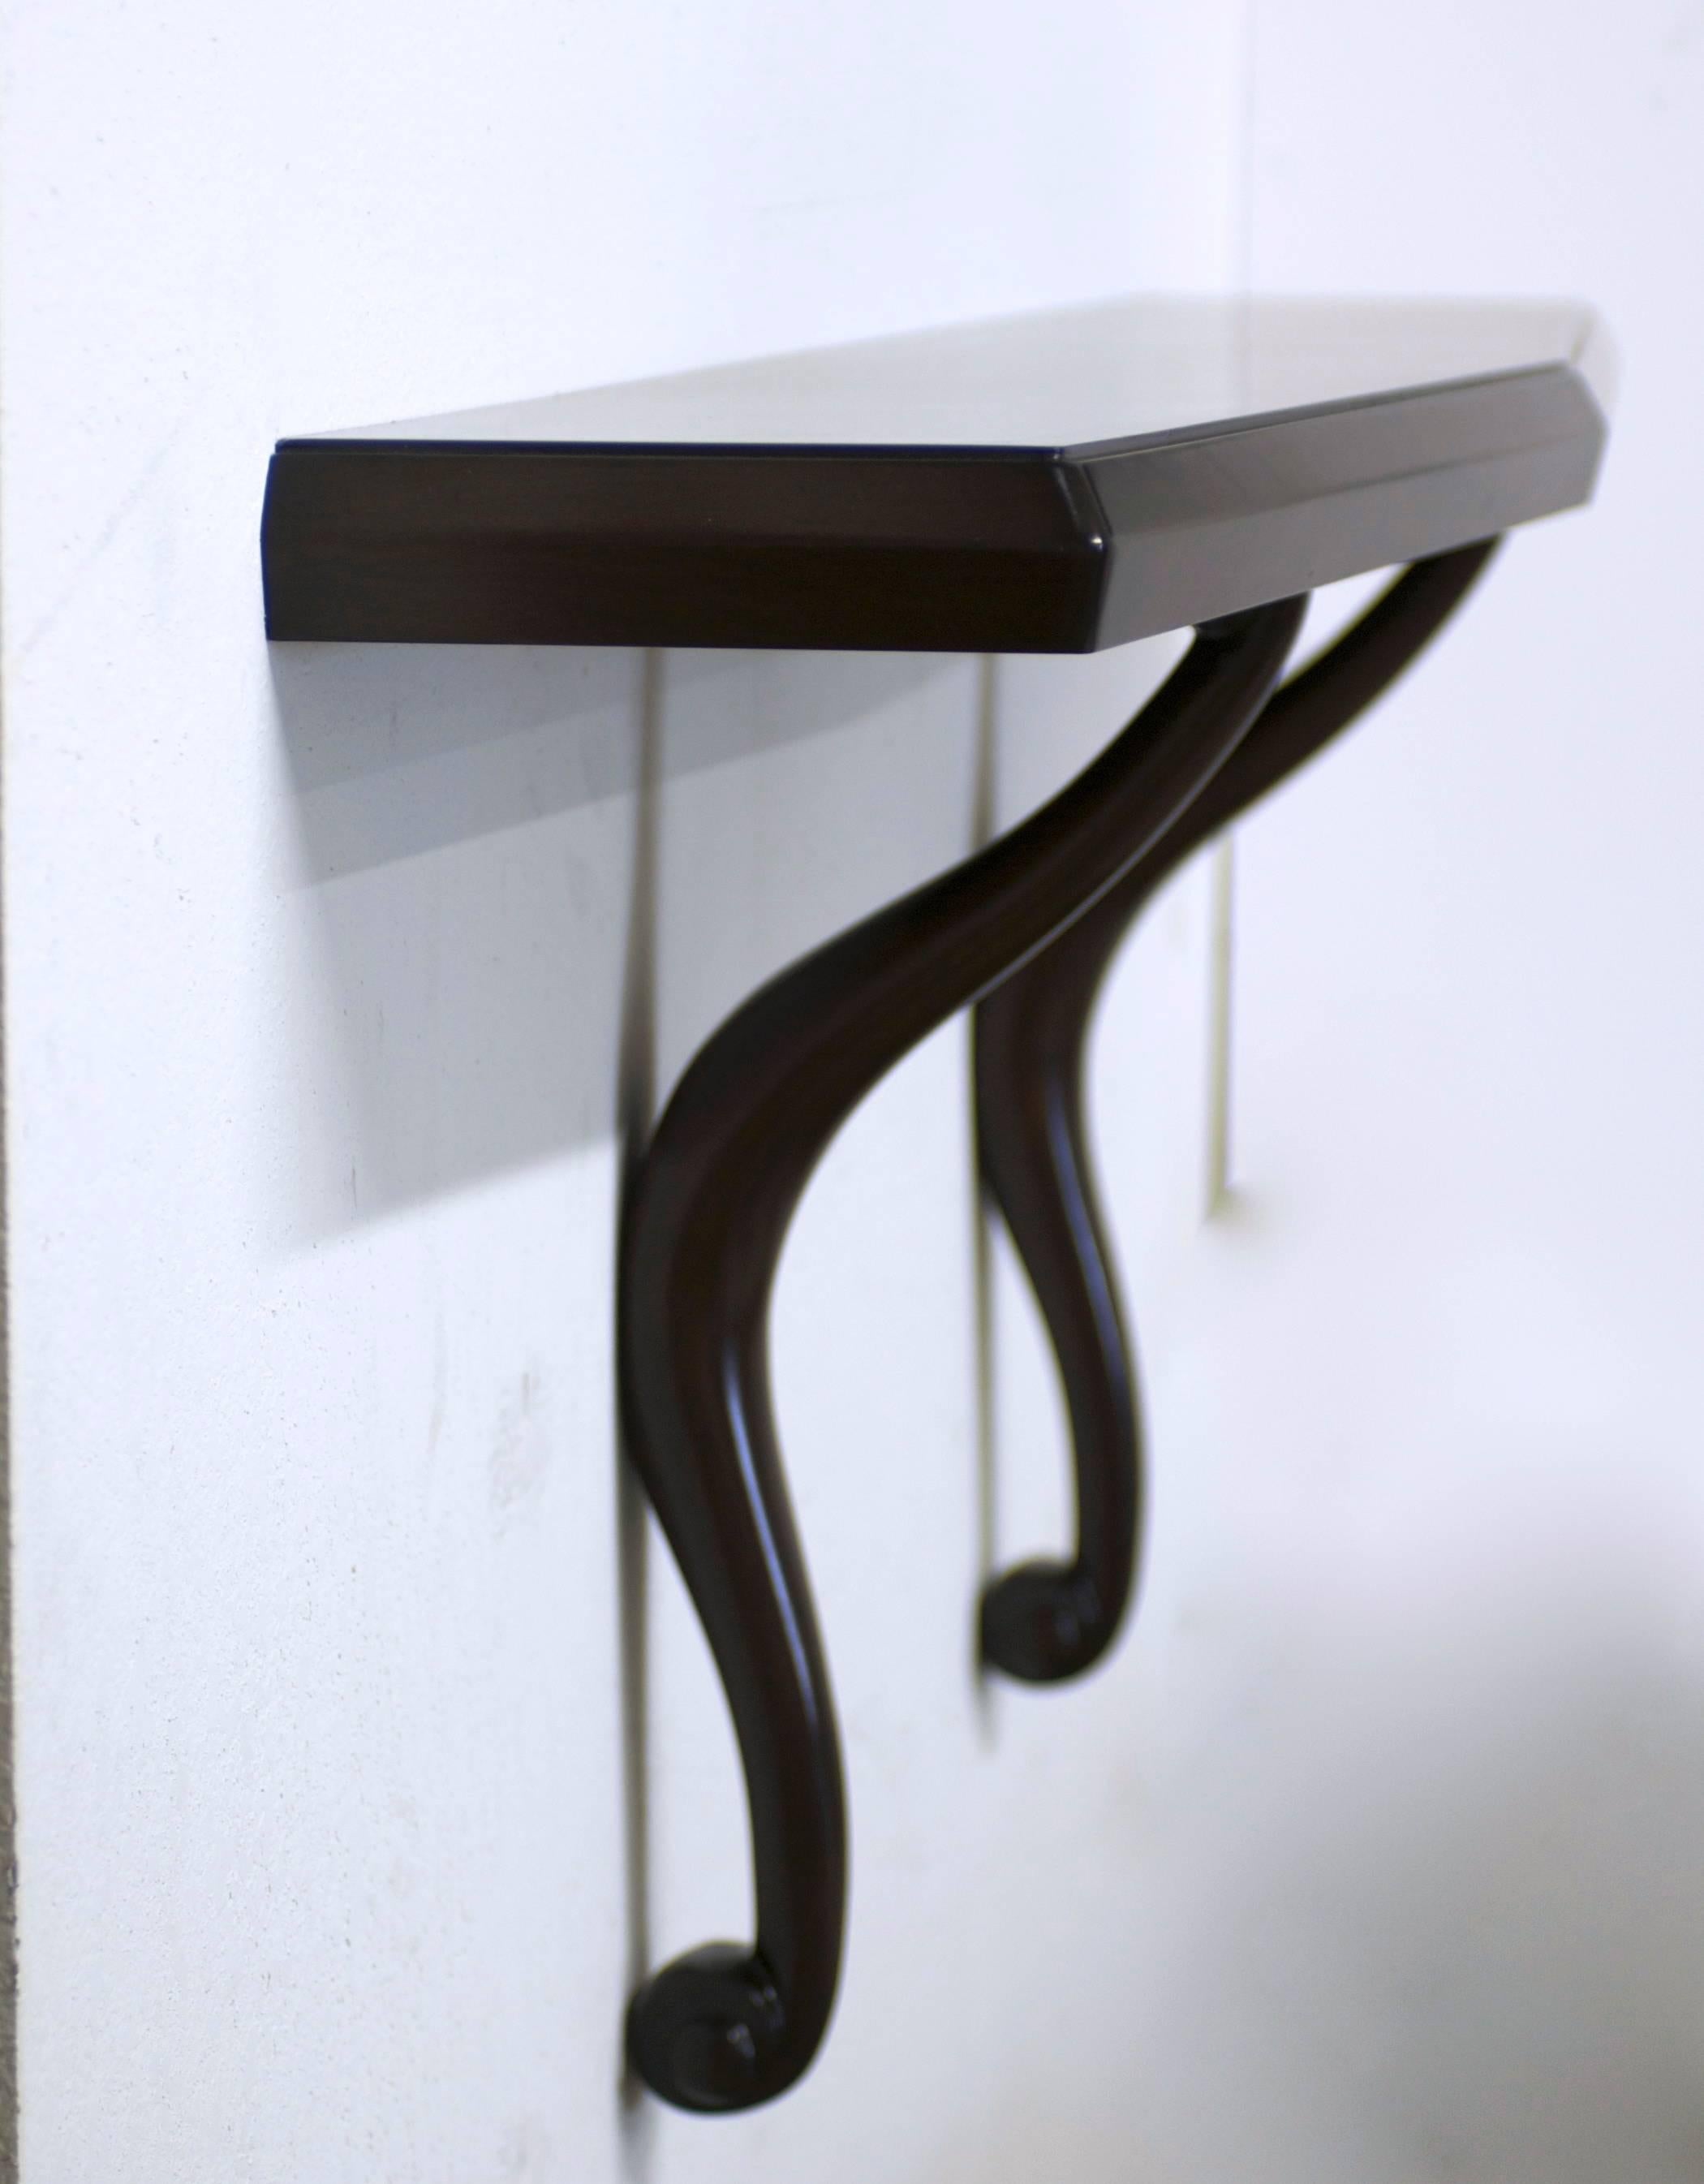 An elegant wall-mounted console made of mahogany. There is a thin inlay of dark ebonized wood on the top. The carved scroll supports gracefully rest on the wall. The console has hidden support pegs that screw into the wall. The shelf profile is 2